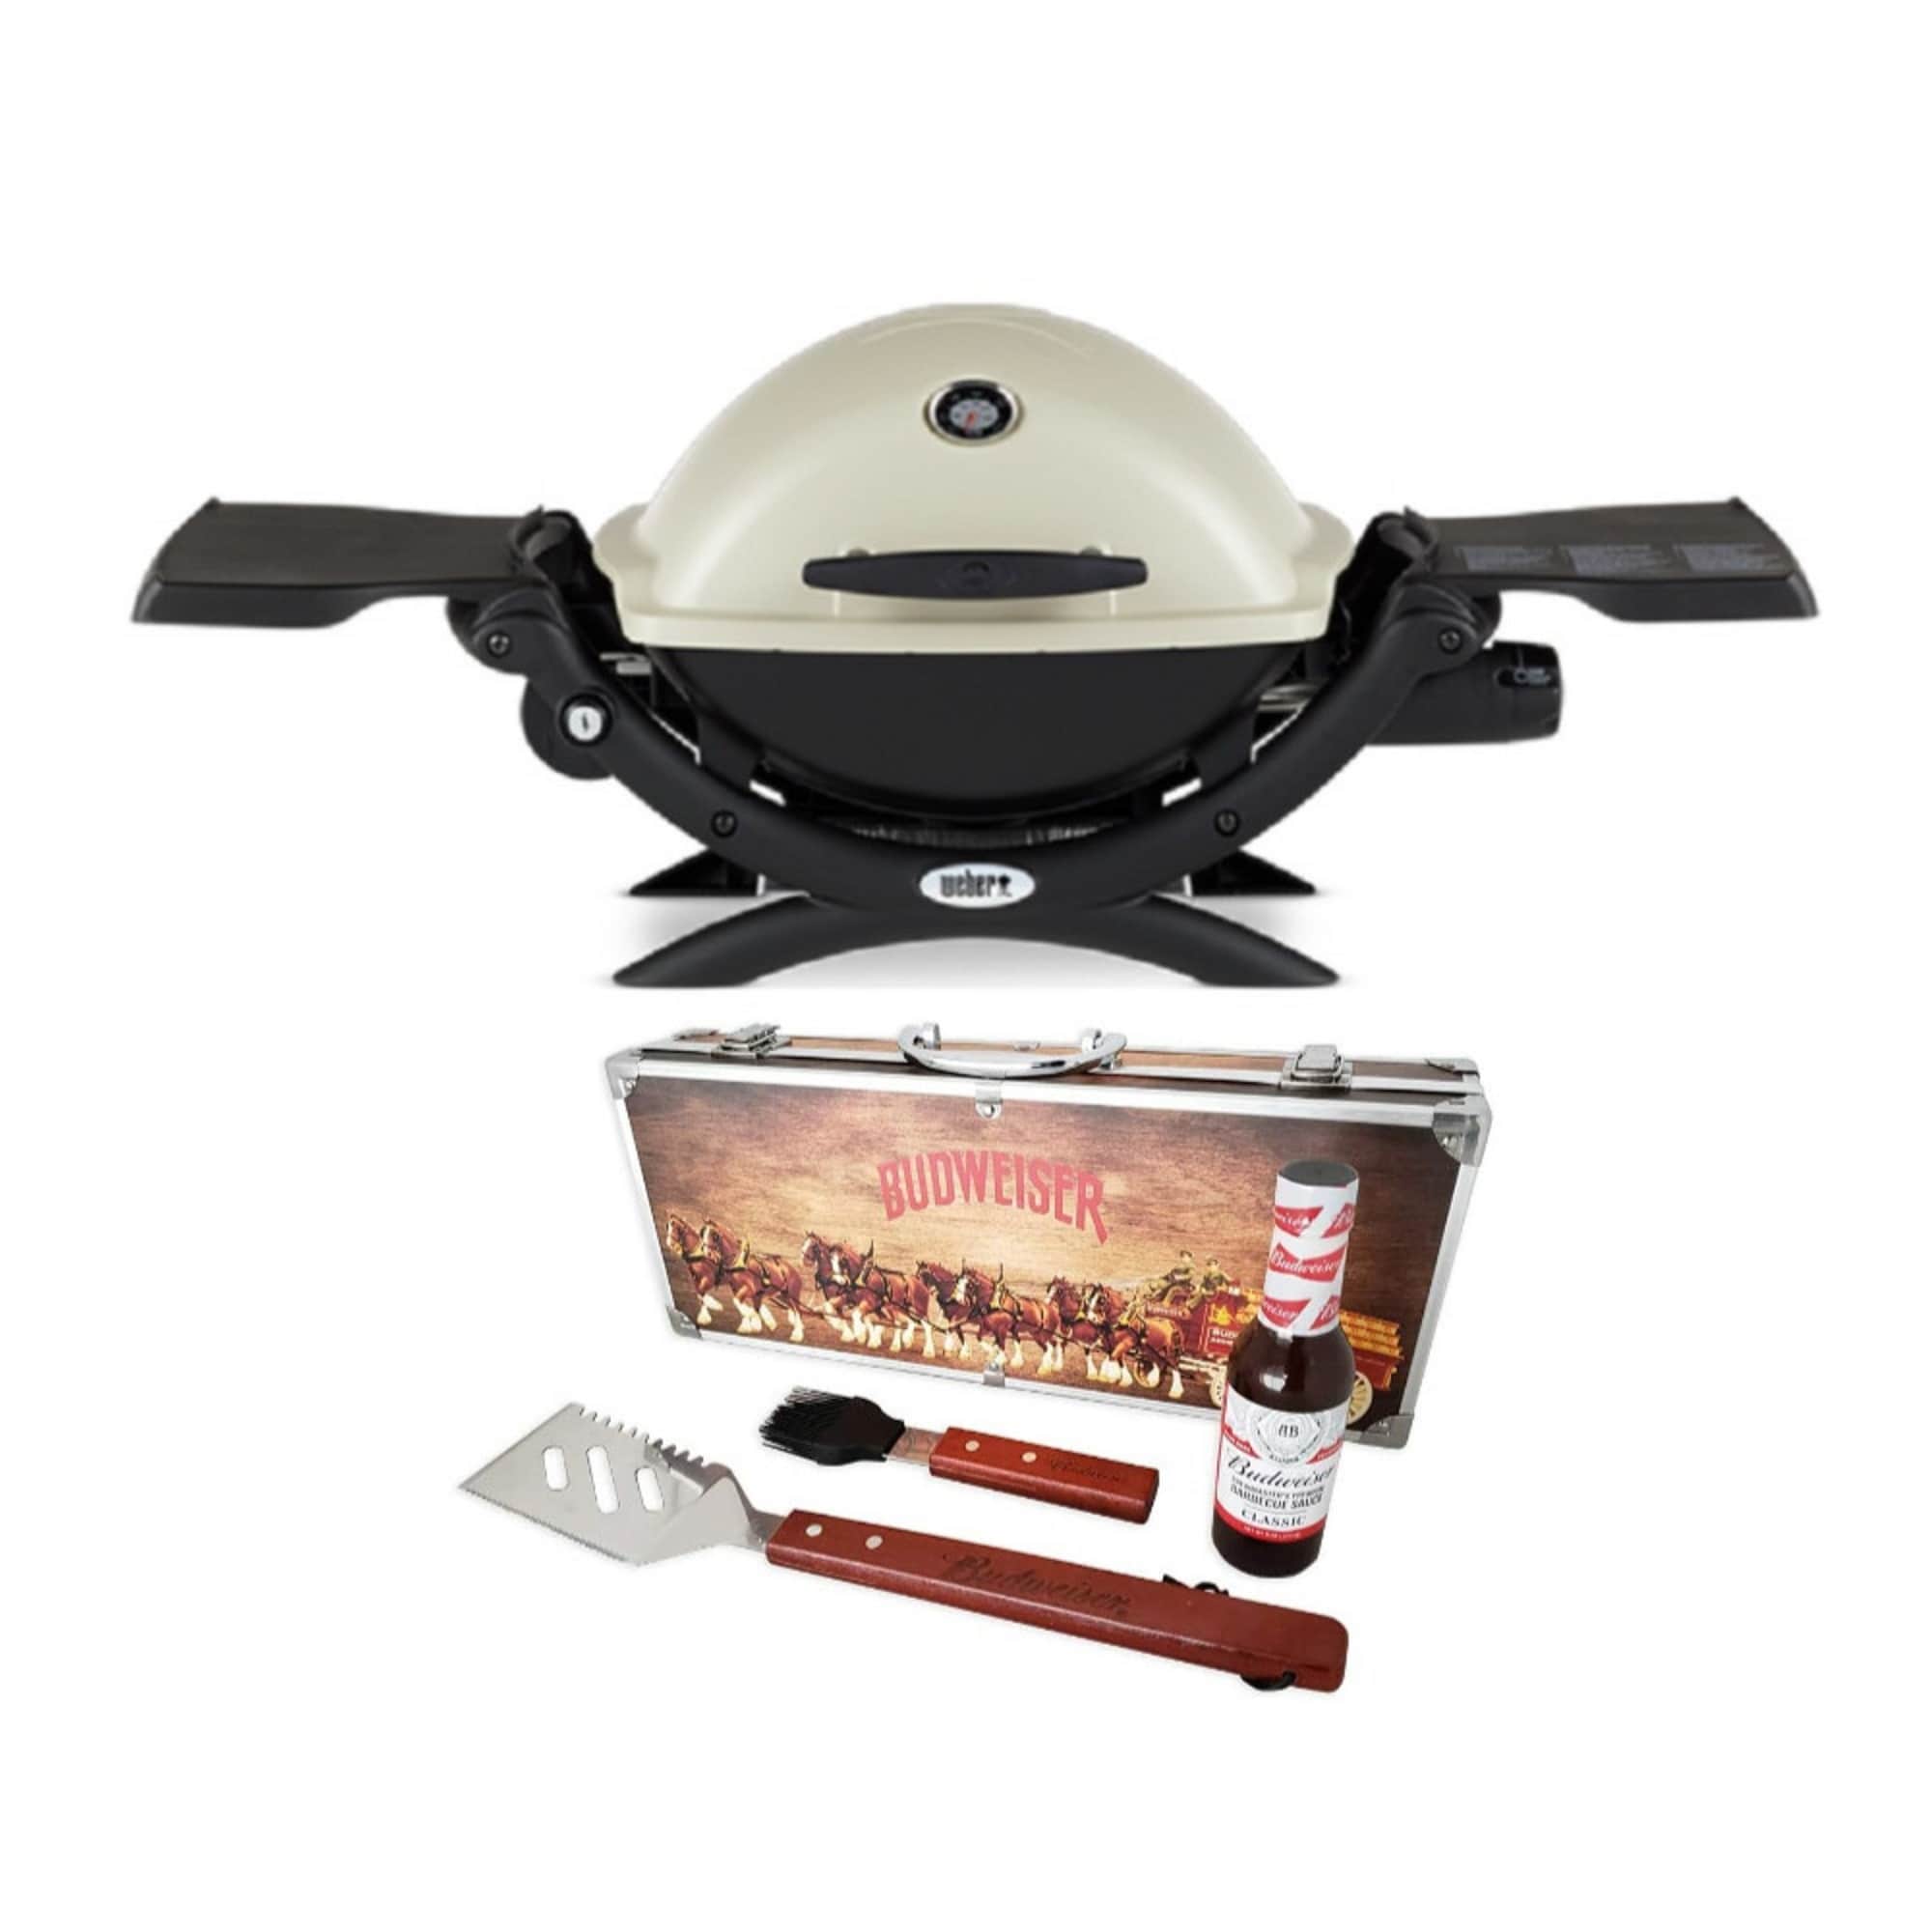 https://ak1.ostkcdn.com/images/products/is/images/direct/74aa4d6e295fc0aef11d054a53e85eac441b662e/Weber-Q-2200-Gas-Grill---LP-Gas-%28Titanium%29-with-4Pc-BBQ-Grill-Gift-Set.jpg